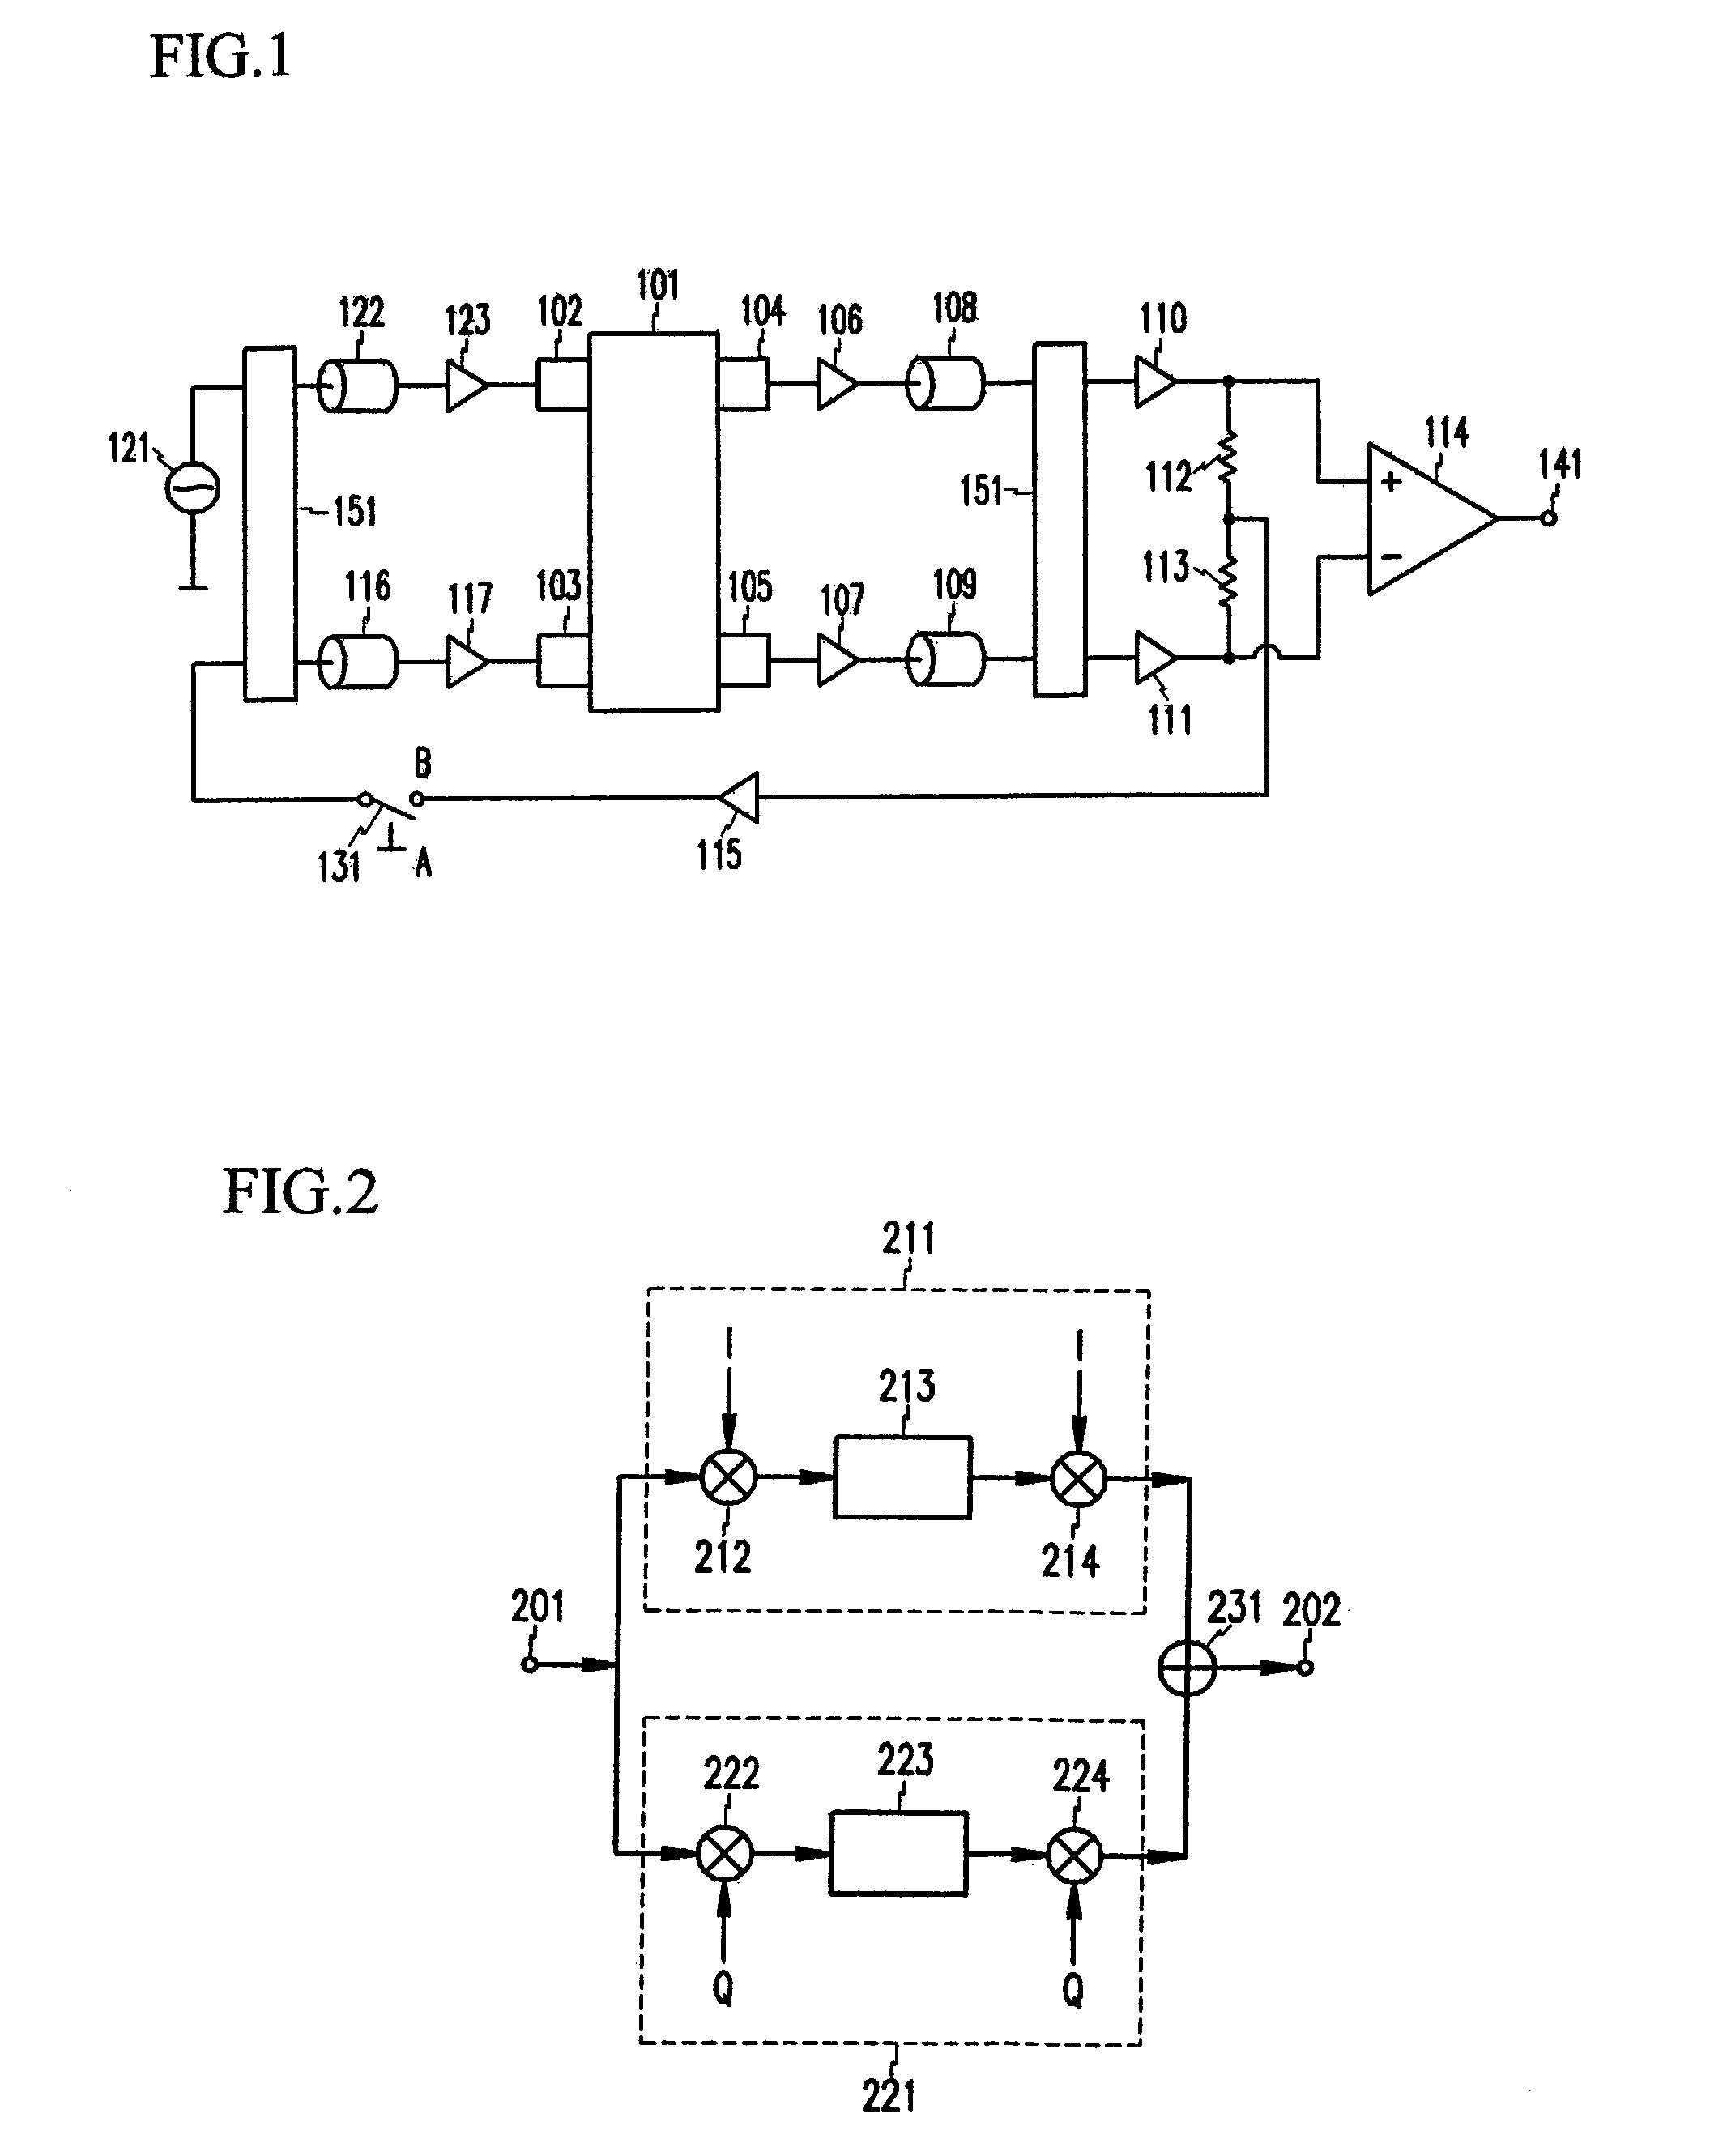 Apparatus for measuring electrical impedance